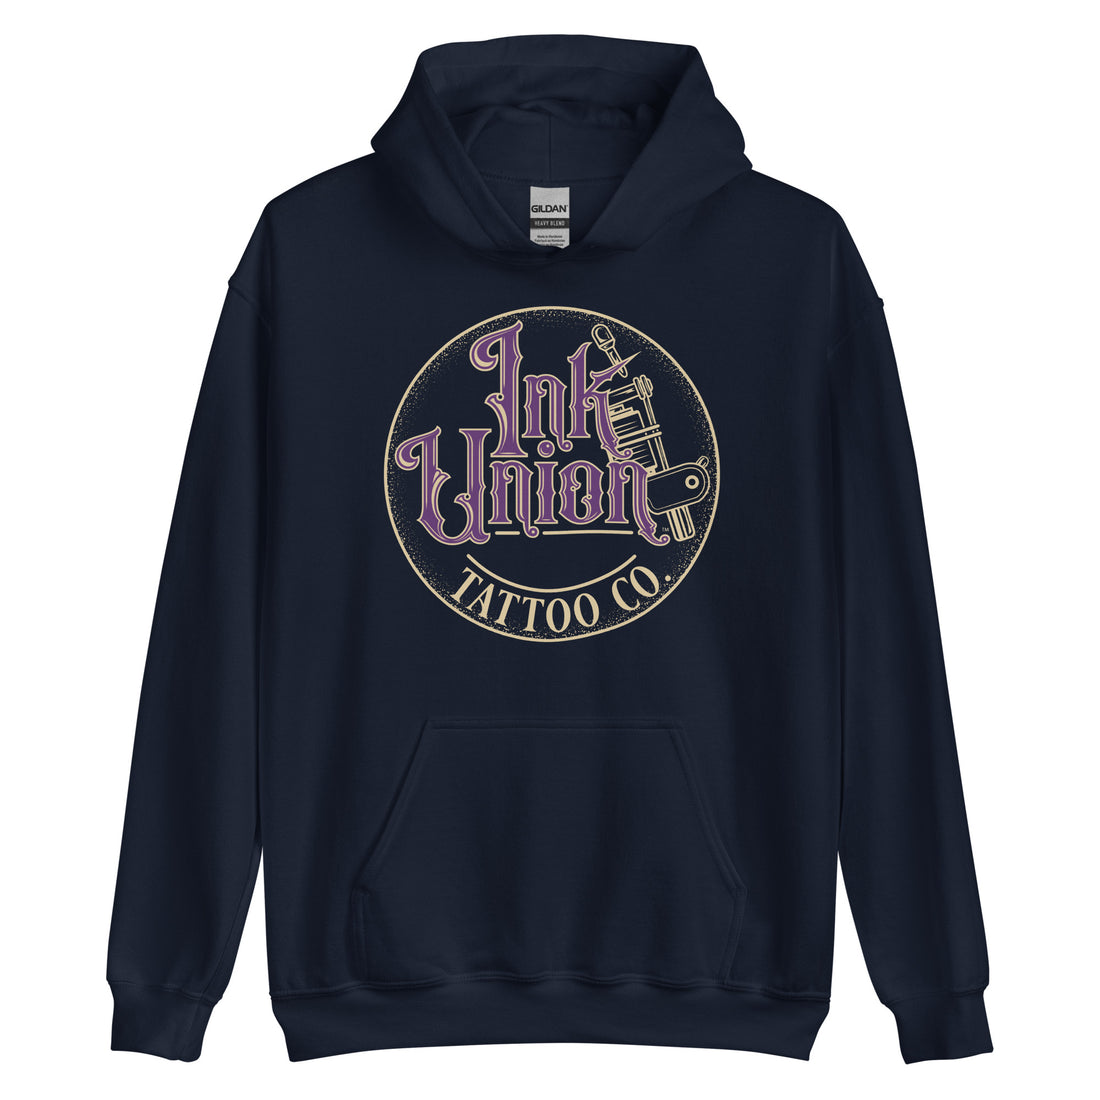 A navy blue hoodie with a gold circle containing fancy lettering in purple and gold that says Ink Union and a gold tattoo machine peeking out from behind on the right side.  There is a dot work gradient inside the circle, and the words Tattoo Co. in gold are at the bottom of the design.